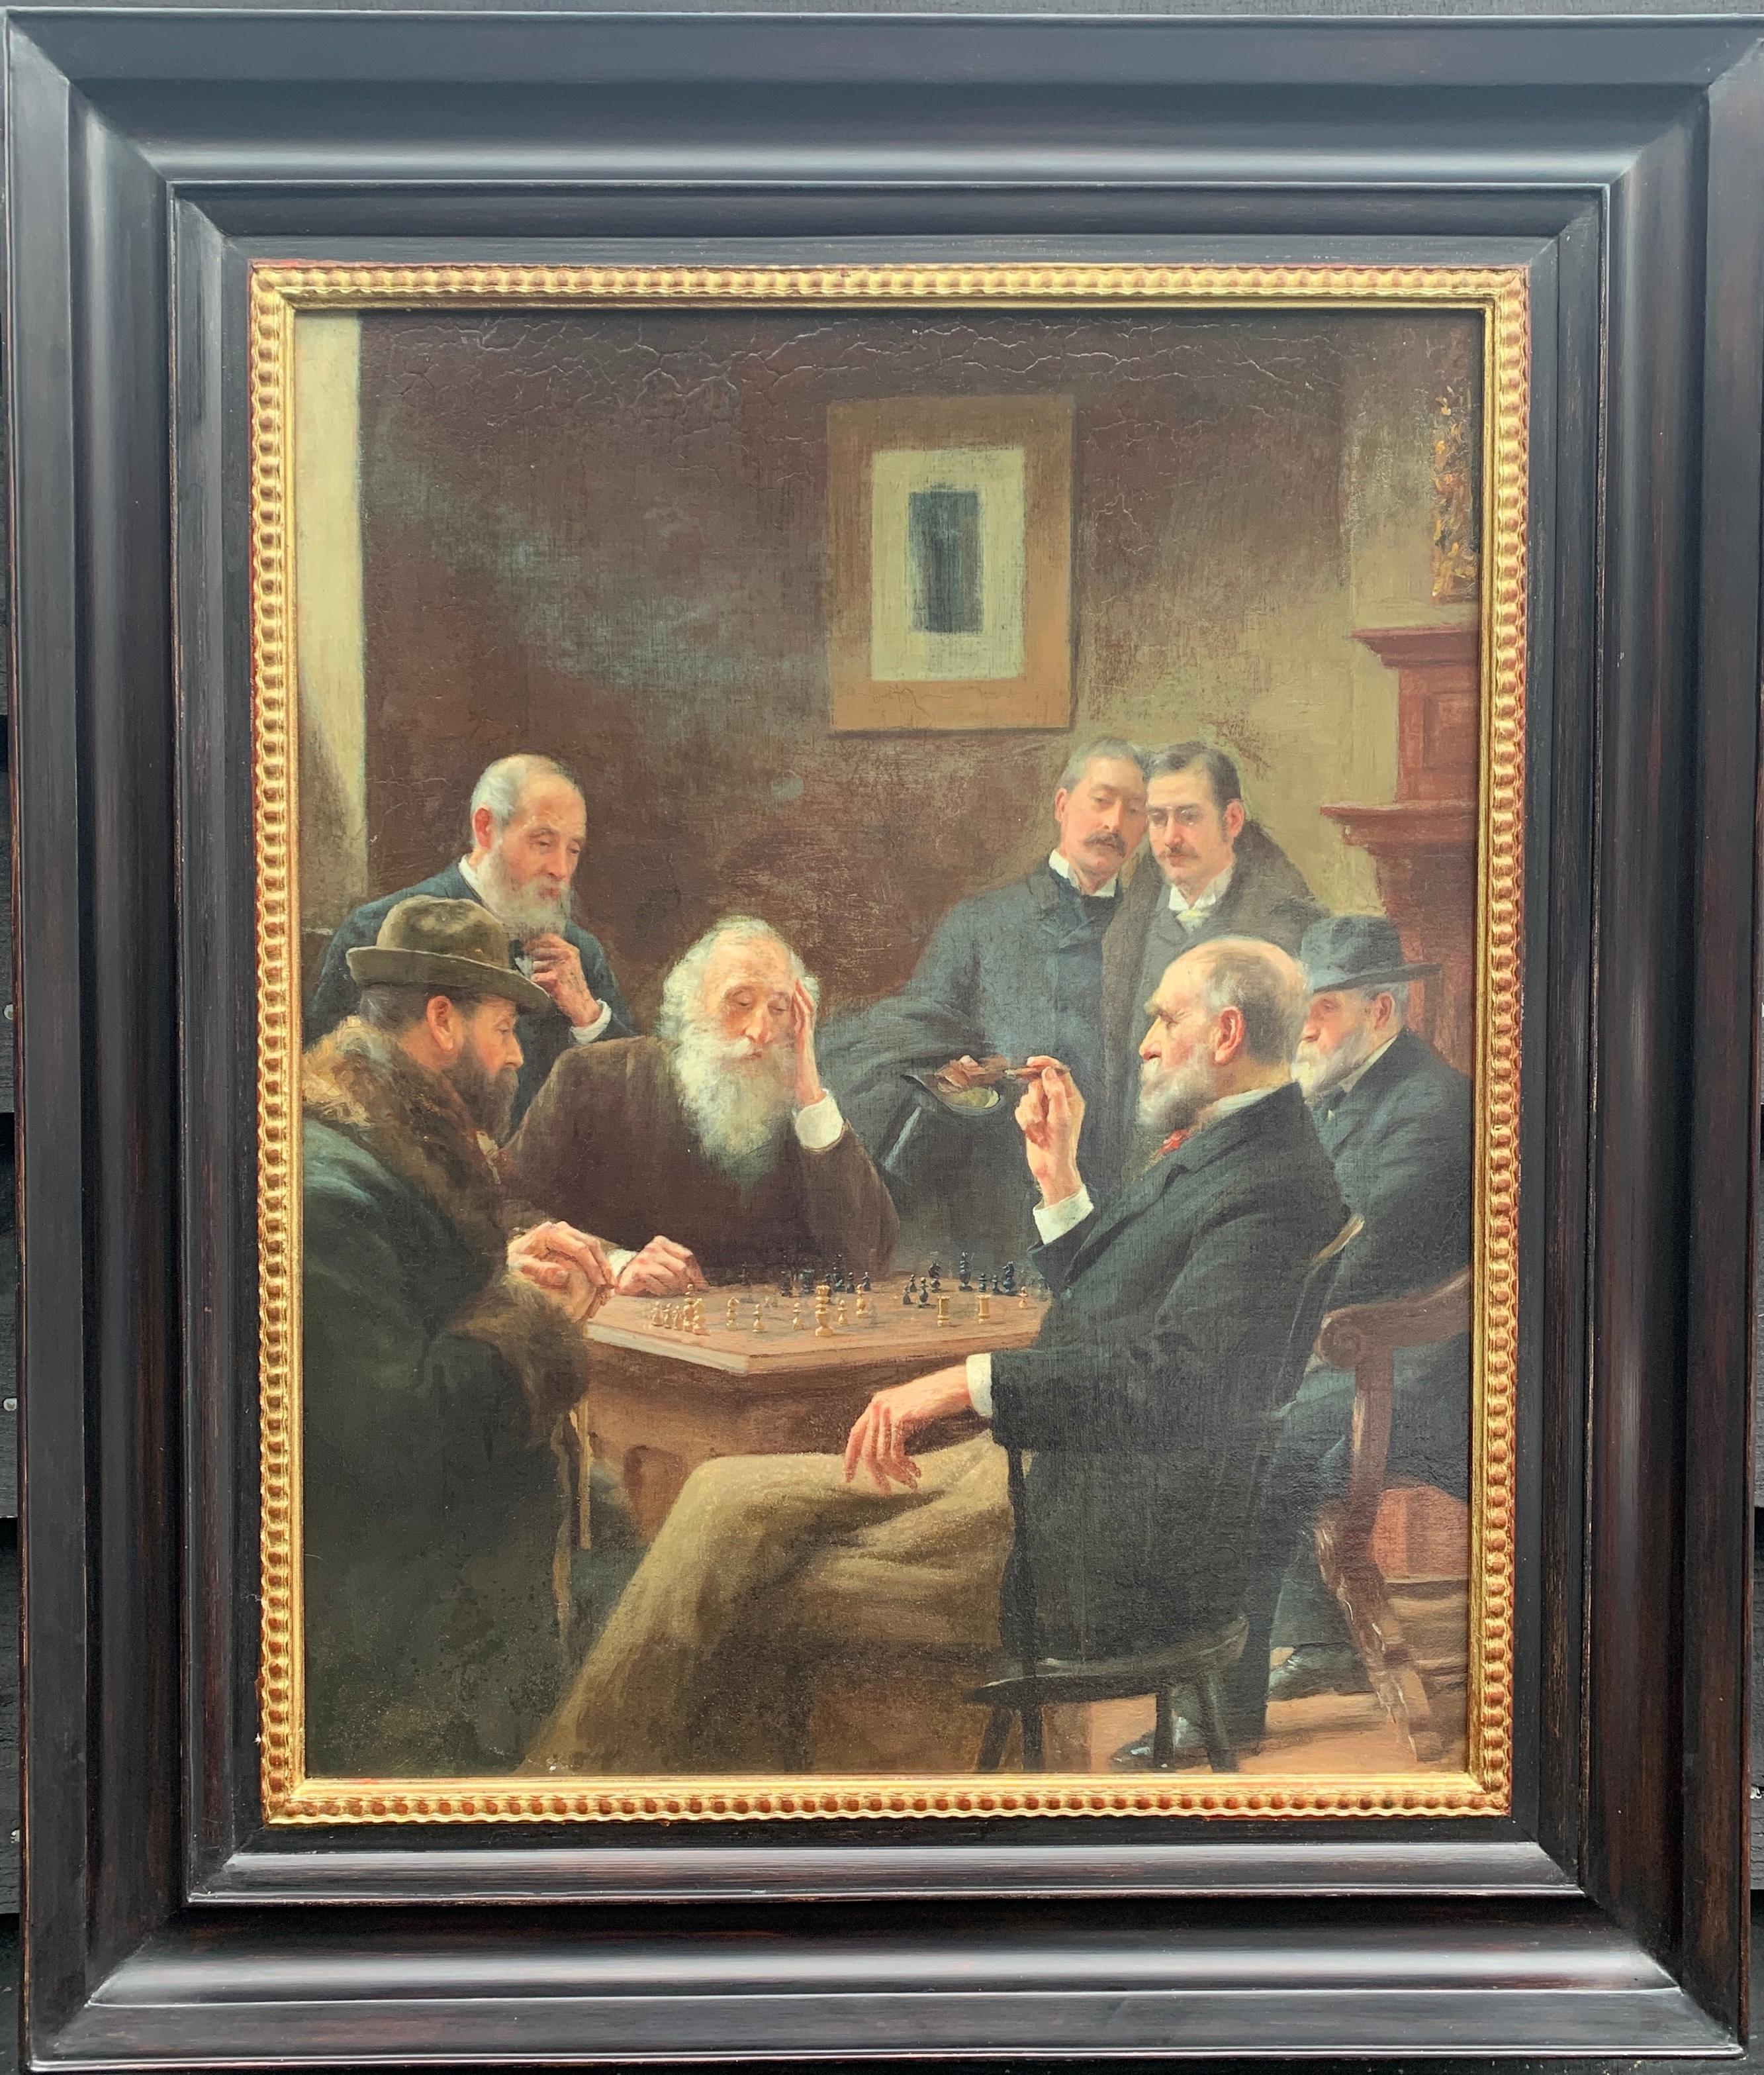 Unknown Portrait Painting - 19th century American or European, Interior portrait of rich men playing chess